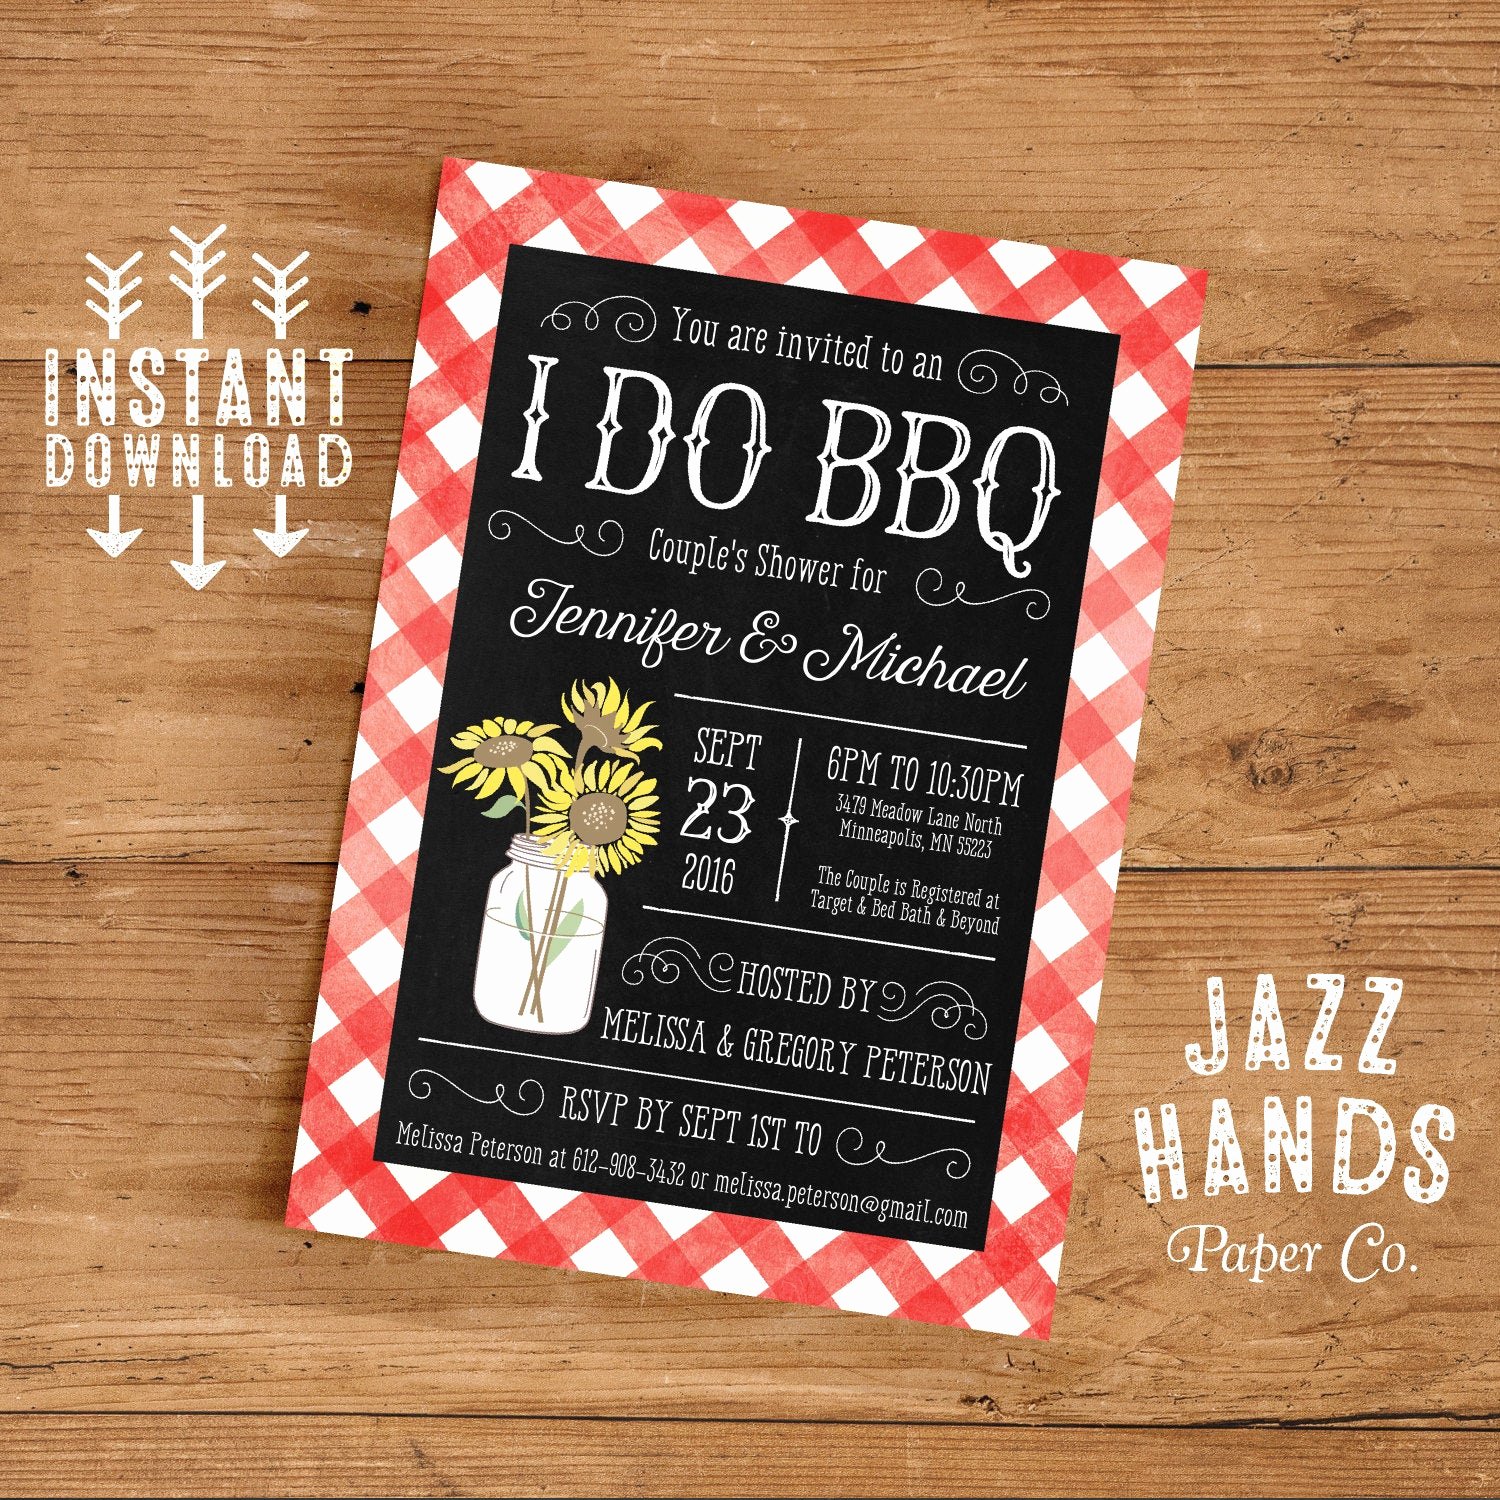 Free Printable Bbq Invitations Best Of Printable I Do Bbq Couples Shower Invitation Template Diy